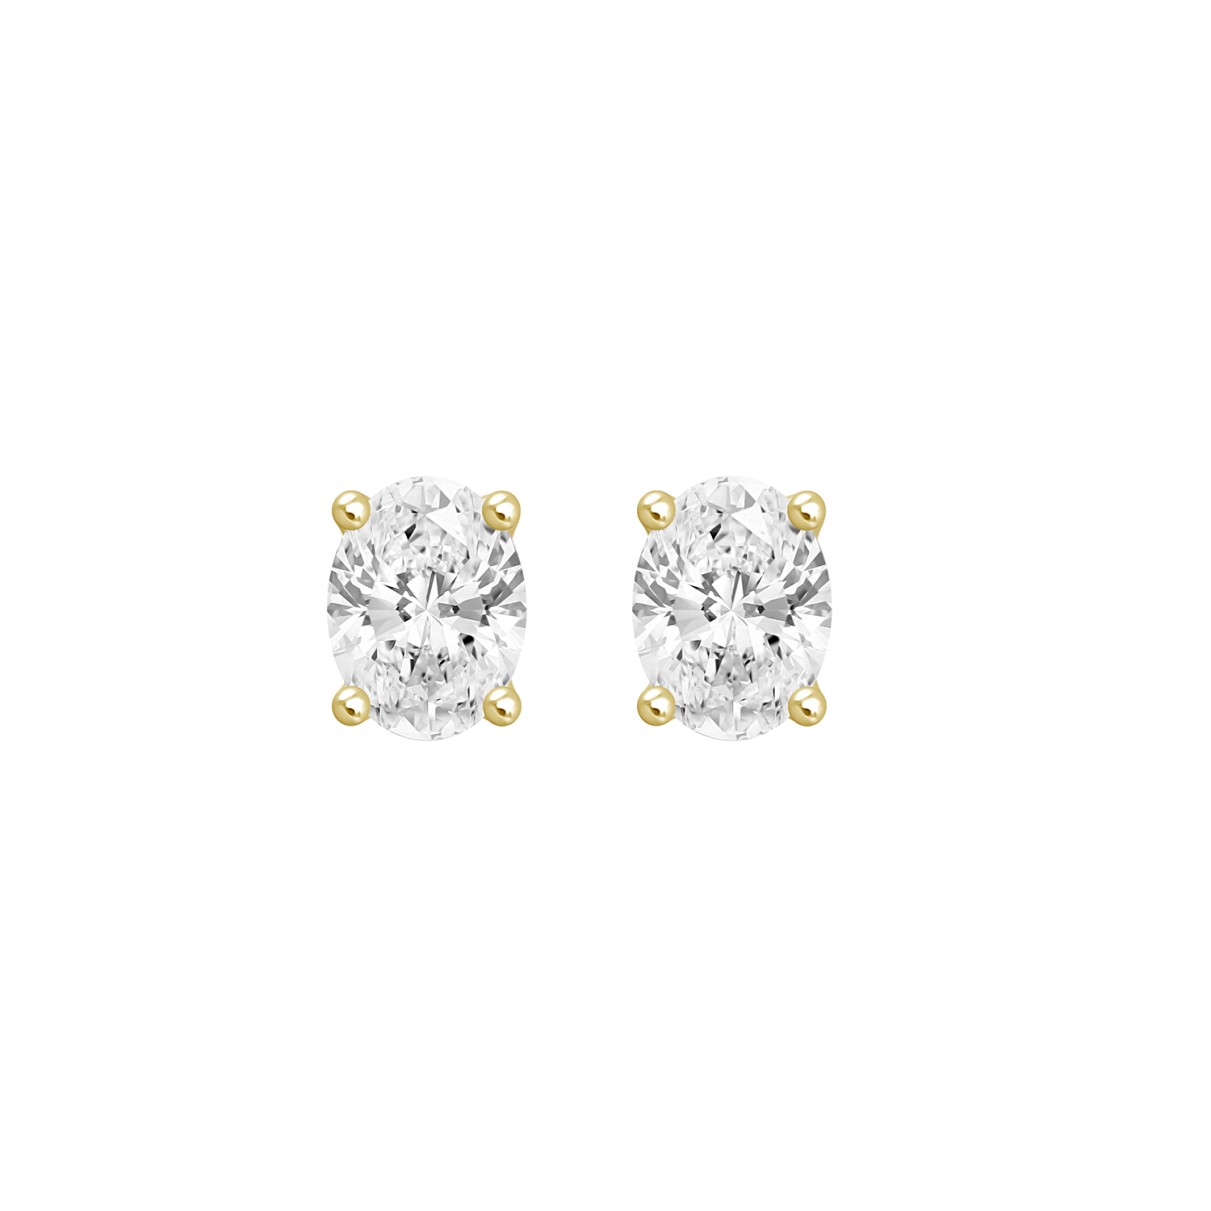 LADIES SOLITAIRE EARRINGS 1CT OVAL DIAMOND 14K YELLOW GOLD